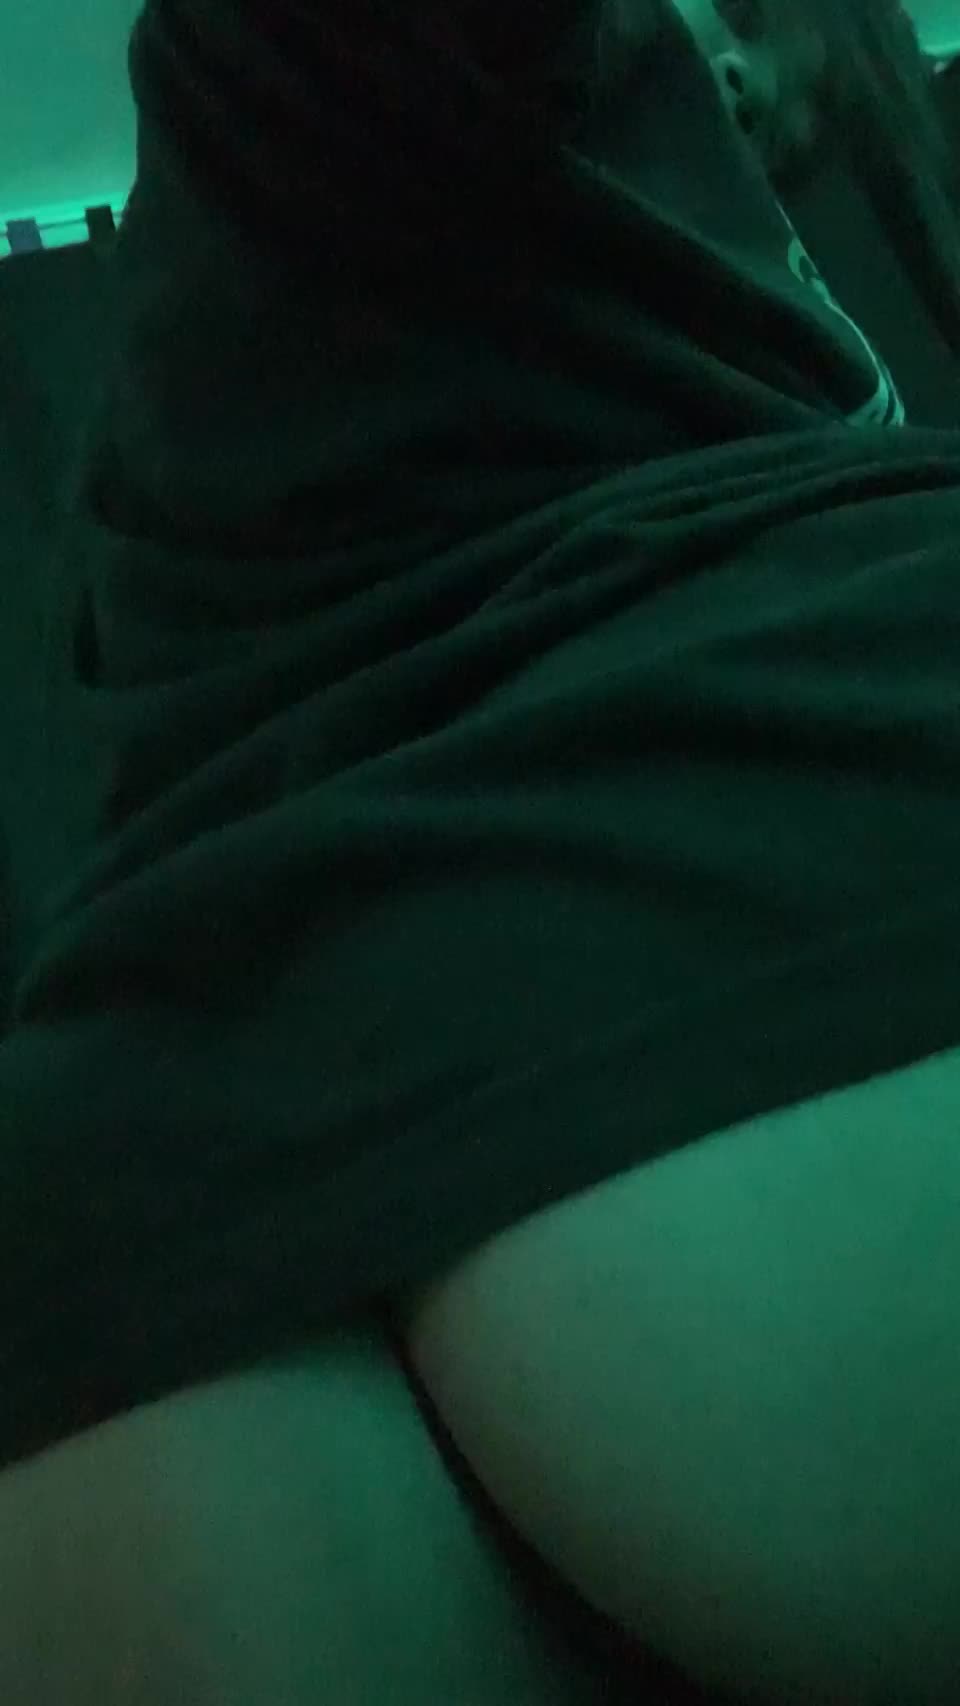 Looking for someone who would enjoy my cheeks! : video clip